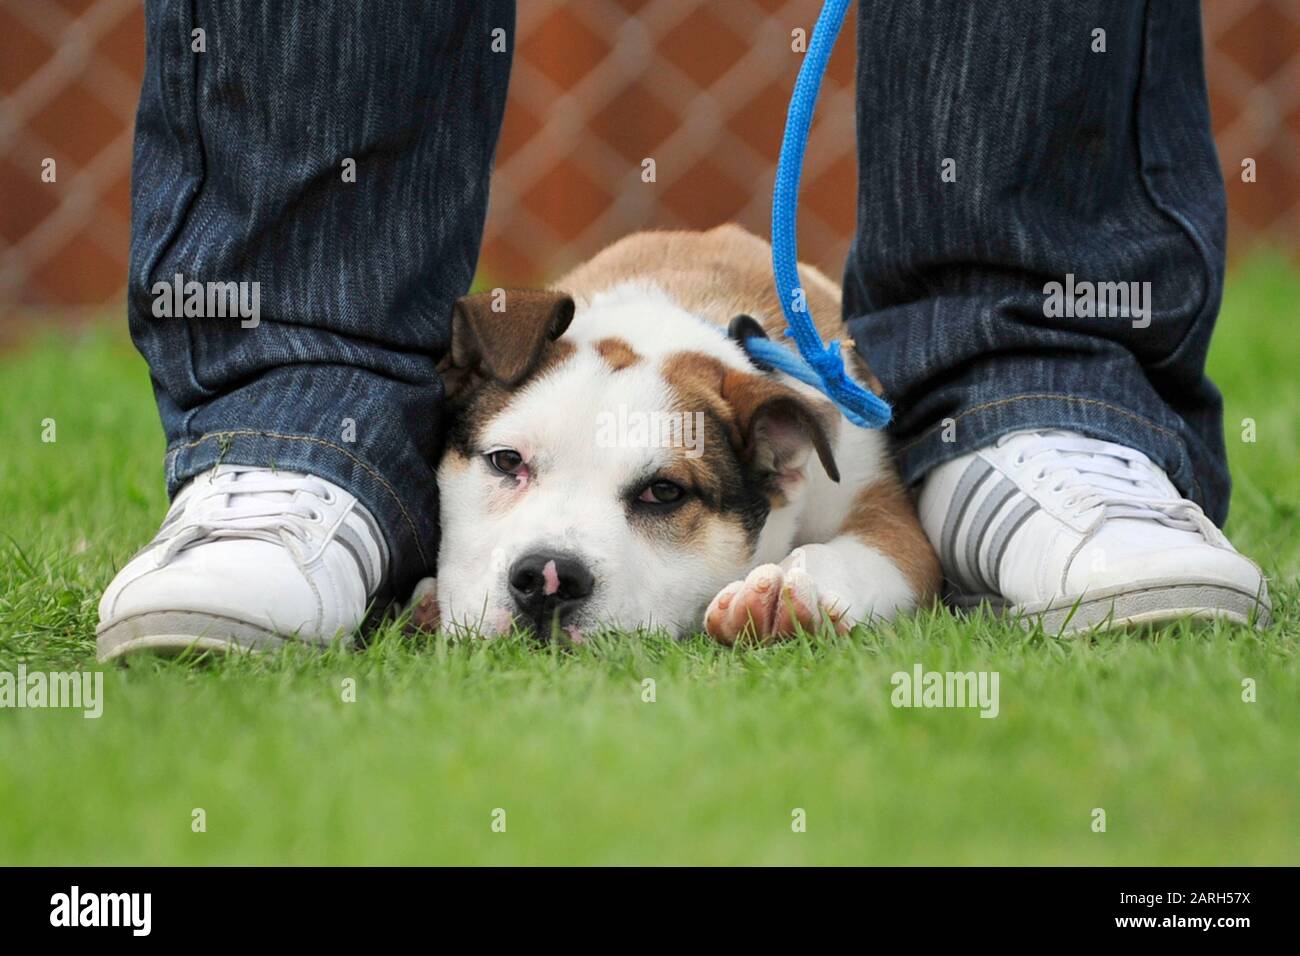 bored dog resting with owner at the park Stock Photo